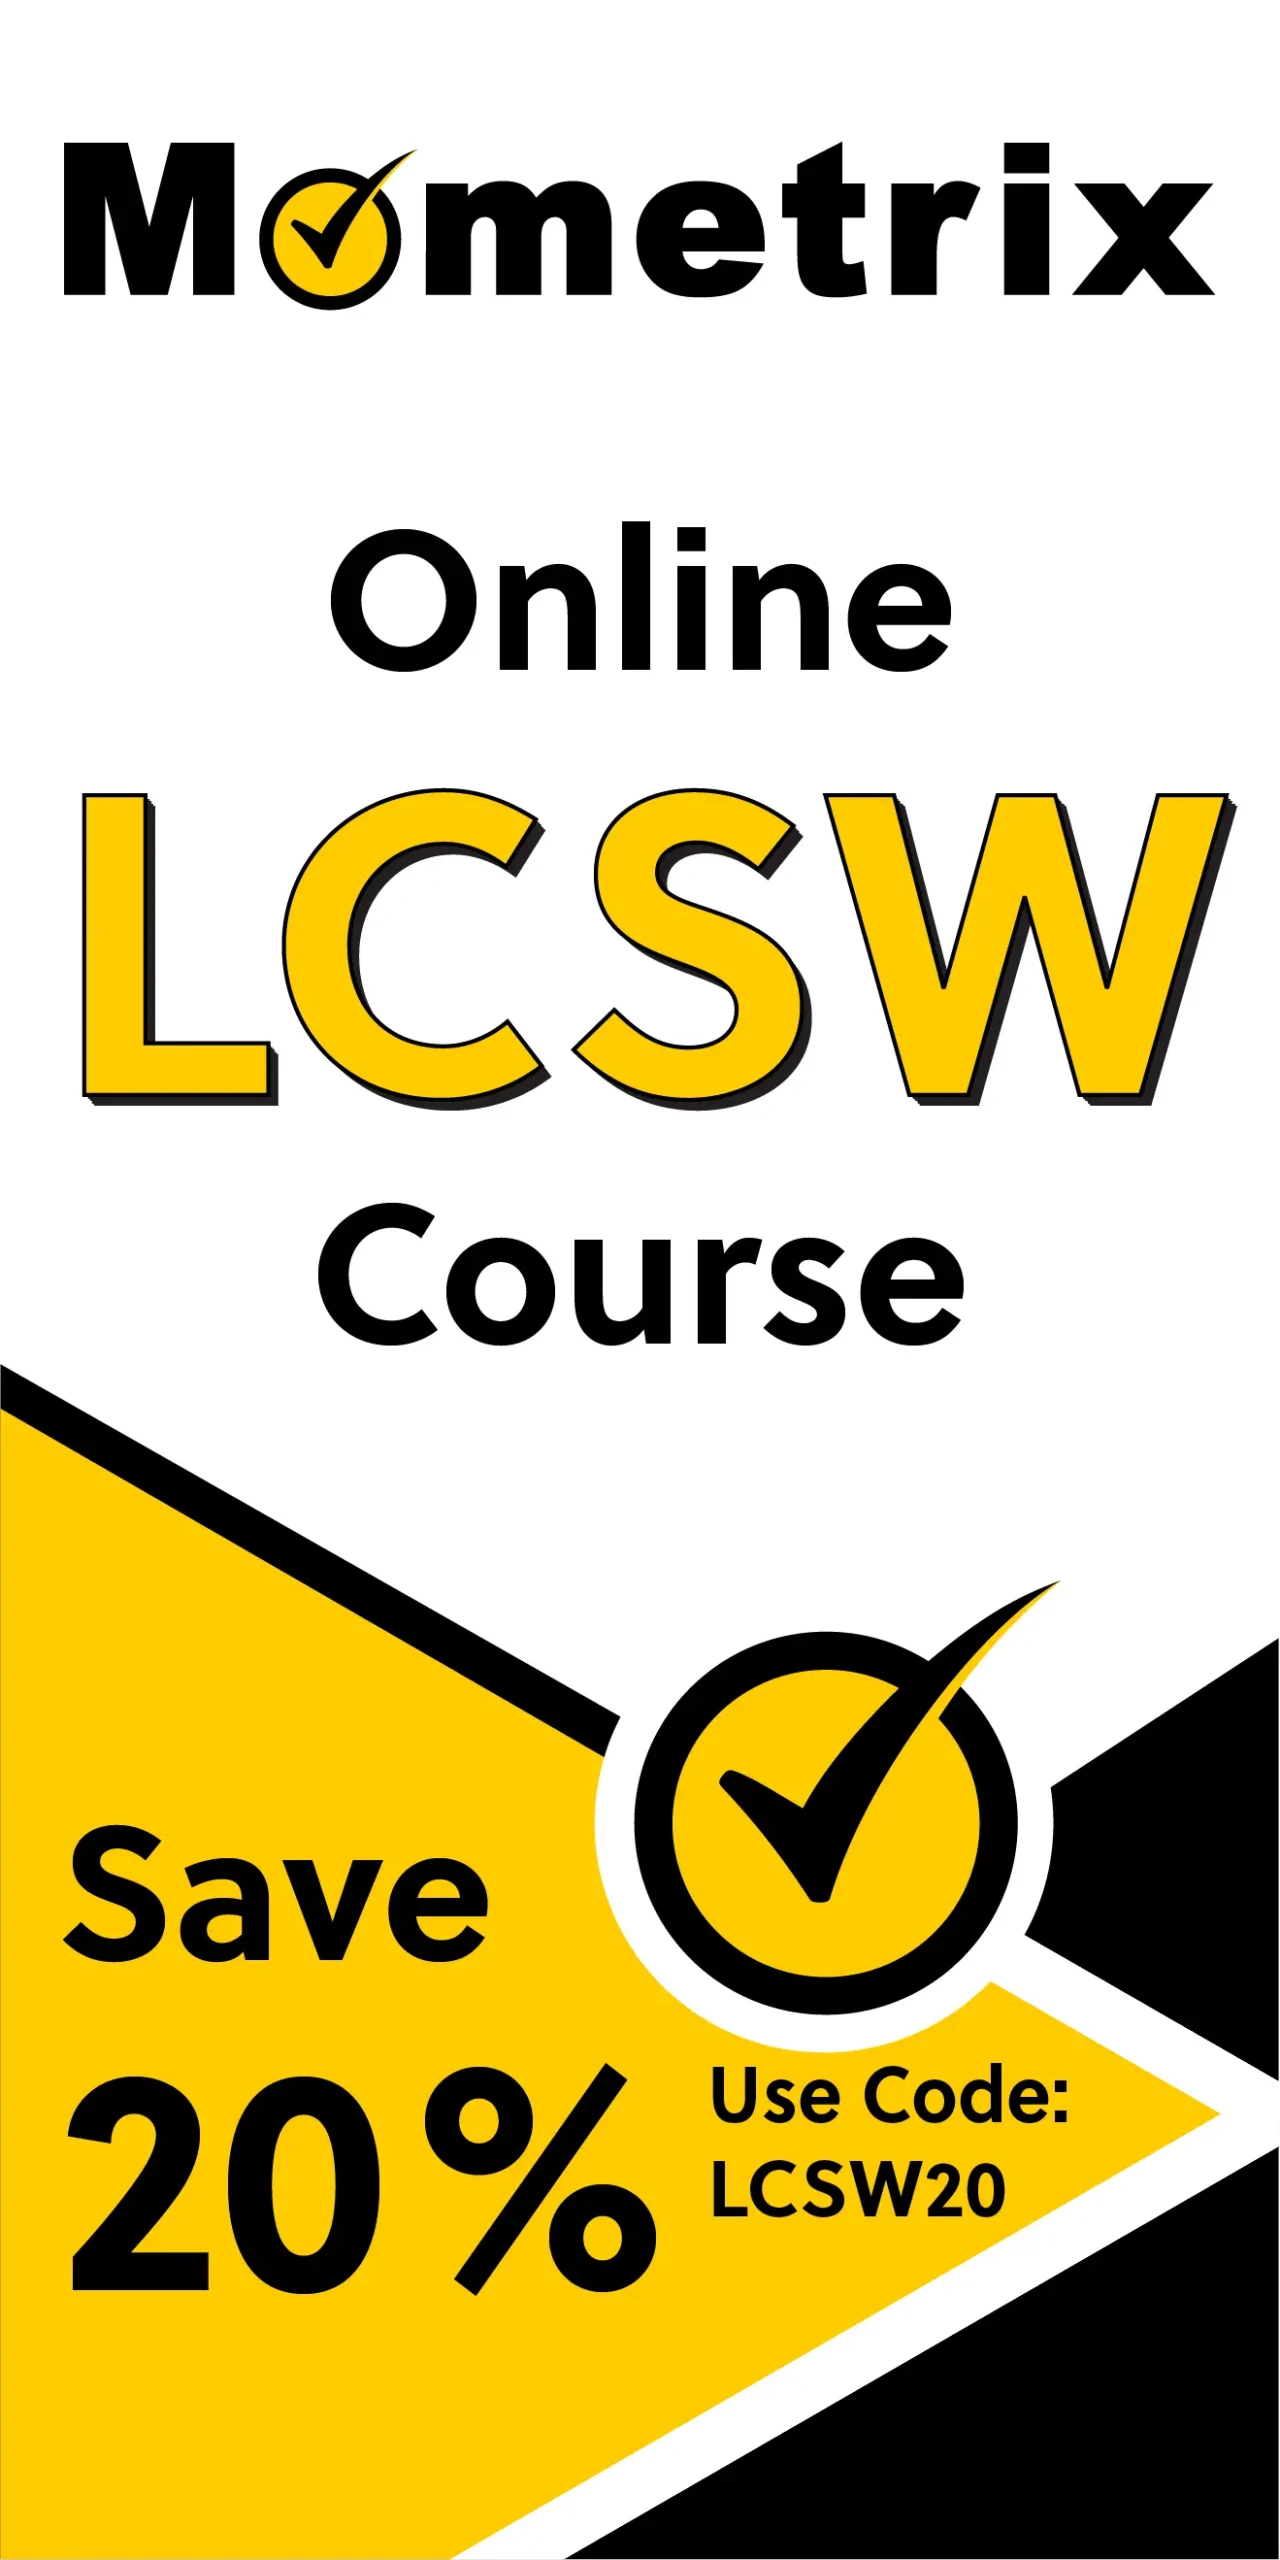 Click here for 20% off of Mometrix LCSW online course. Use code: LCSW20